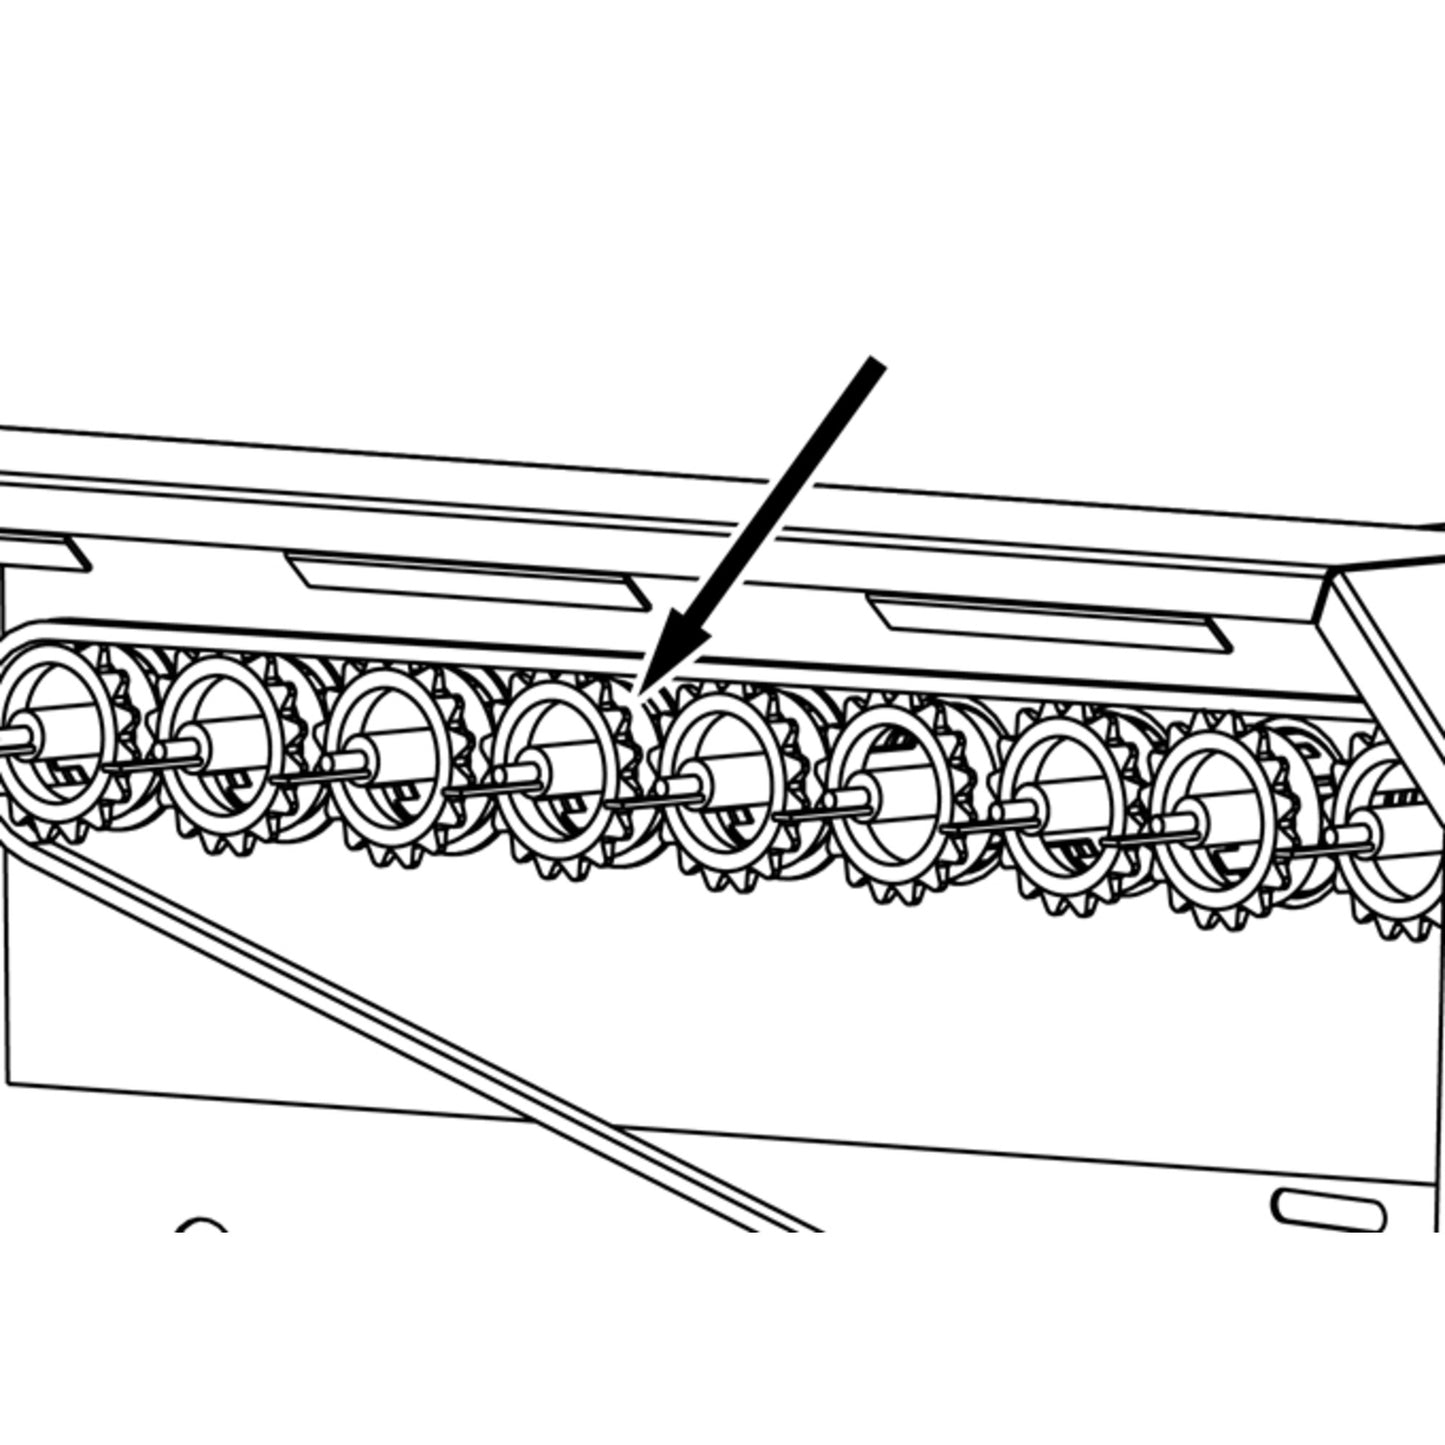 EHDG-P3 - Gear - 16 Teeth, Attached to Motor Shaft for EHDG